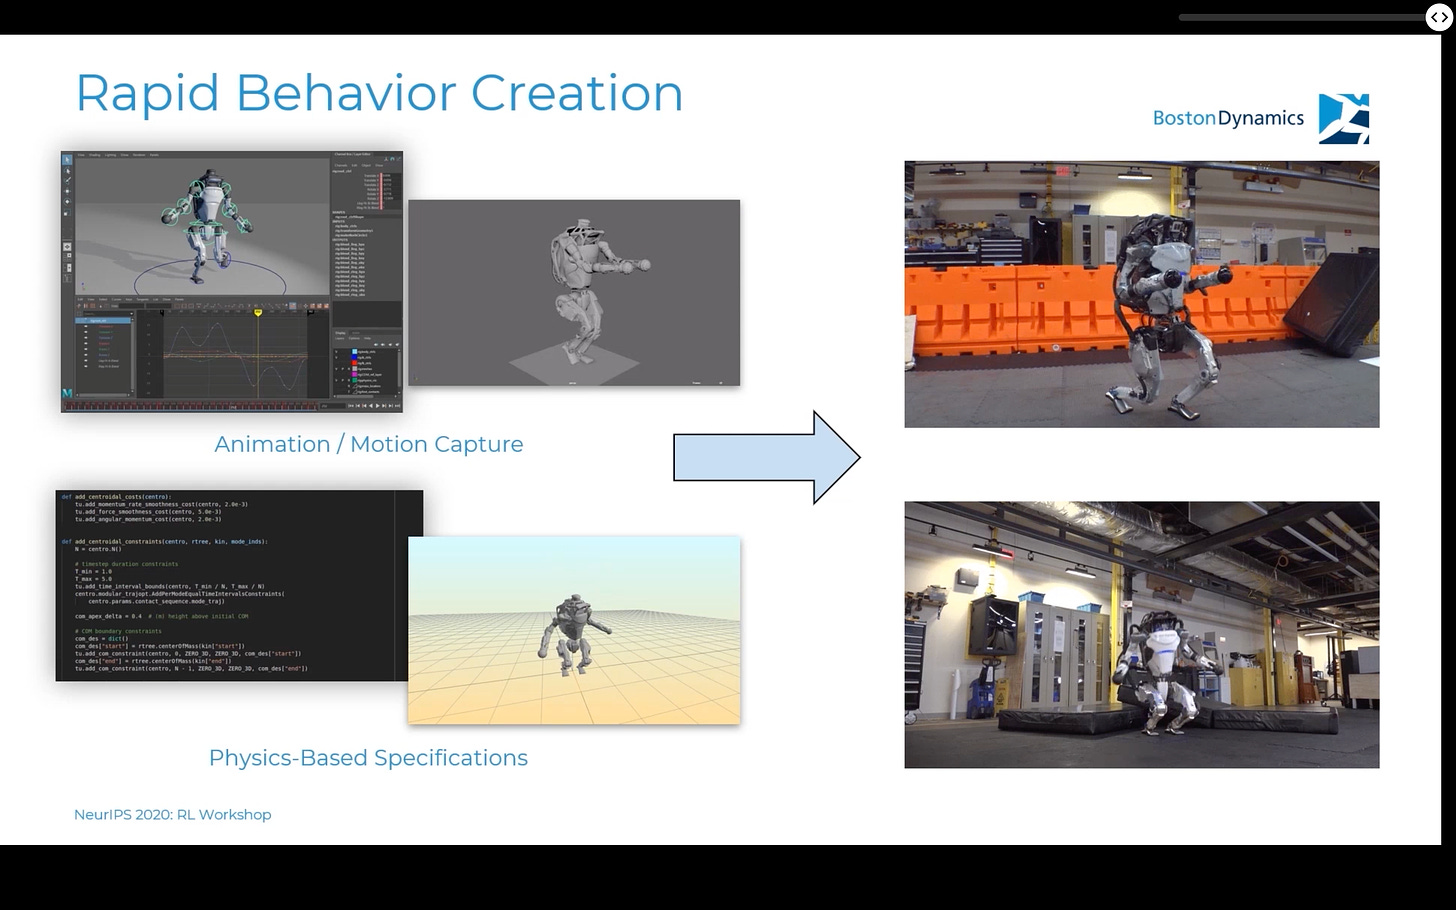 A slide from their real world RL workshop talk on data-driven MPC and general robotic agility.